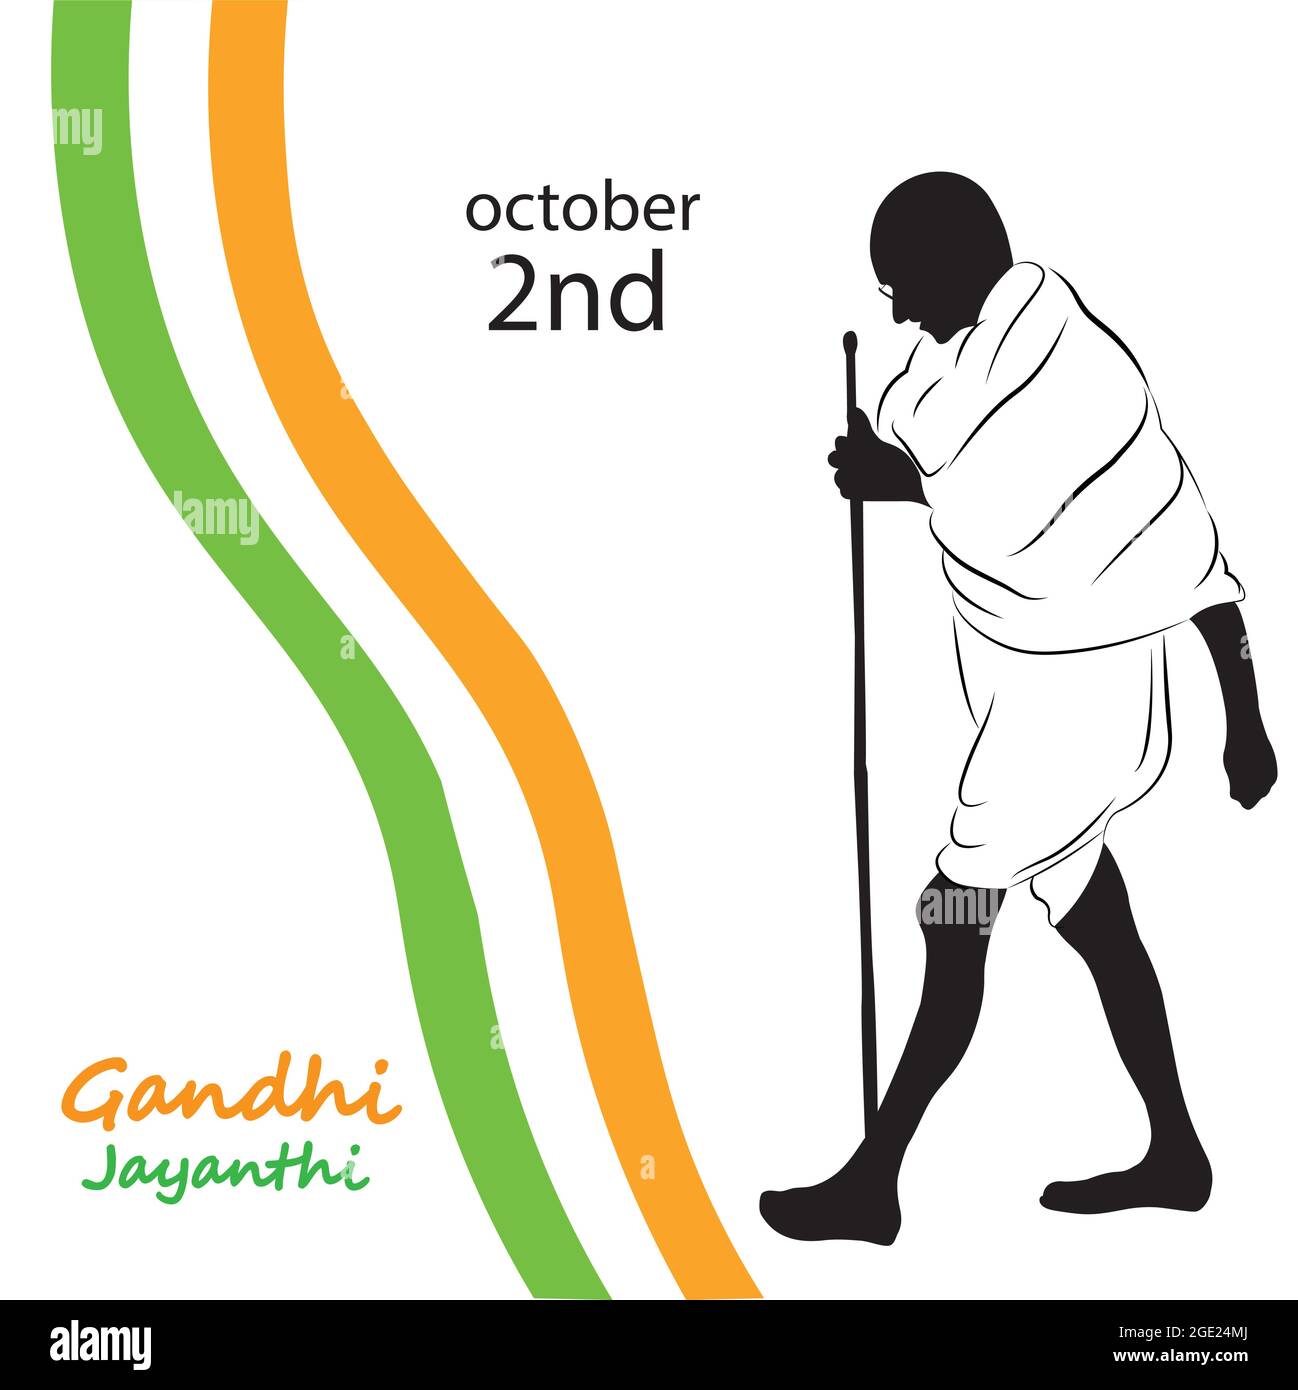 Gandhi Jayanti is a national holiday in India. Mahatma gandhi, great Indian freedom fighter. October 2 Stock Vector